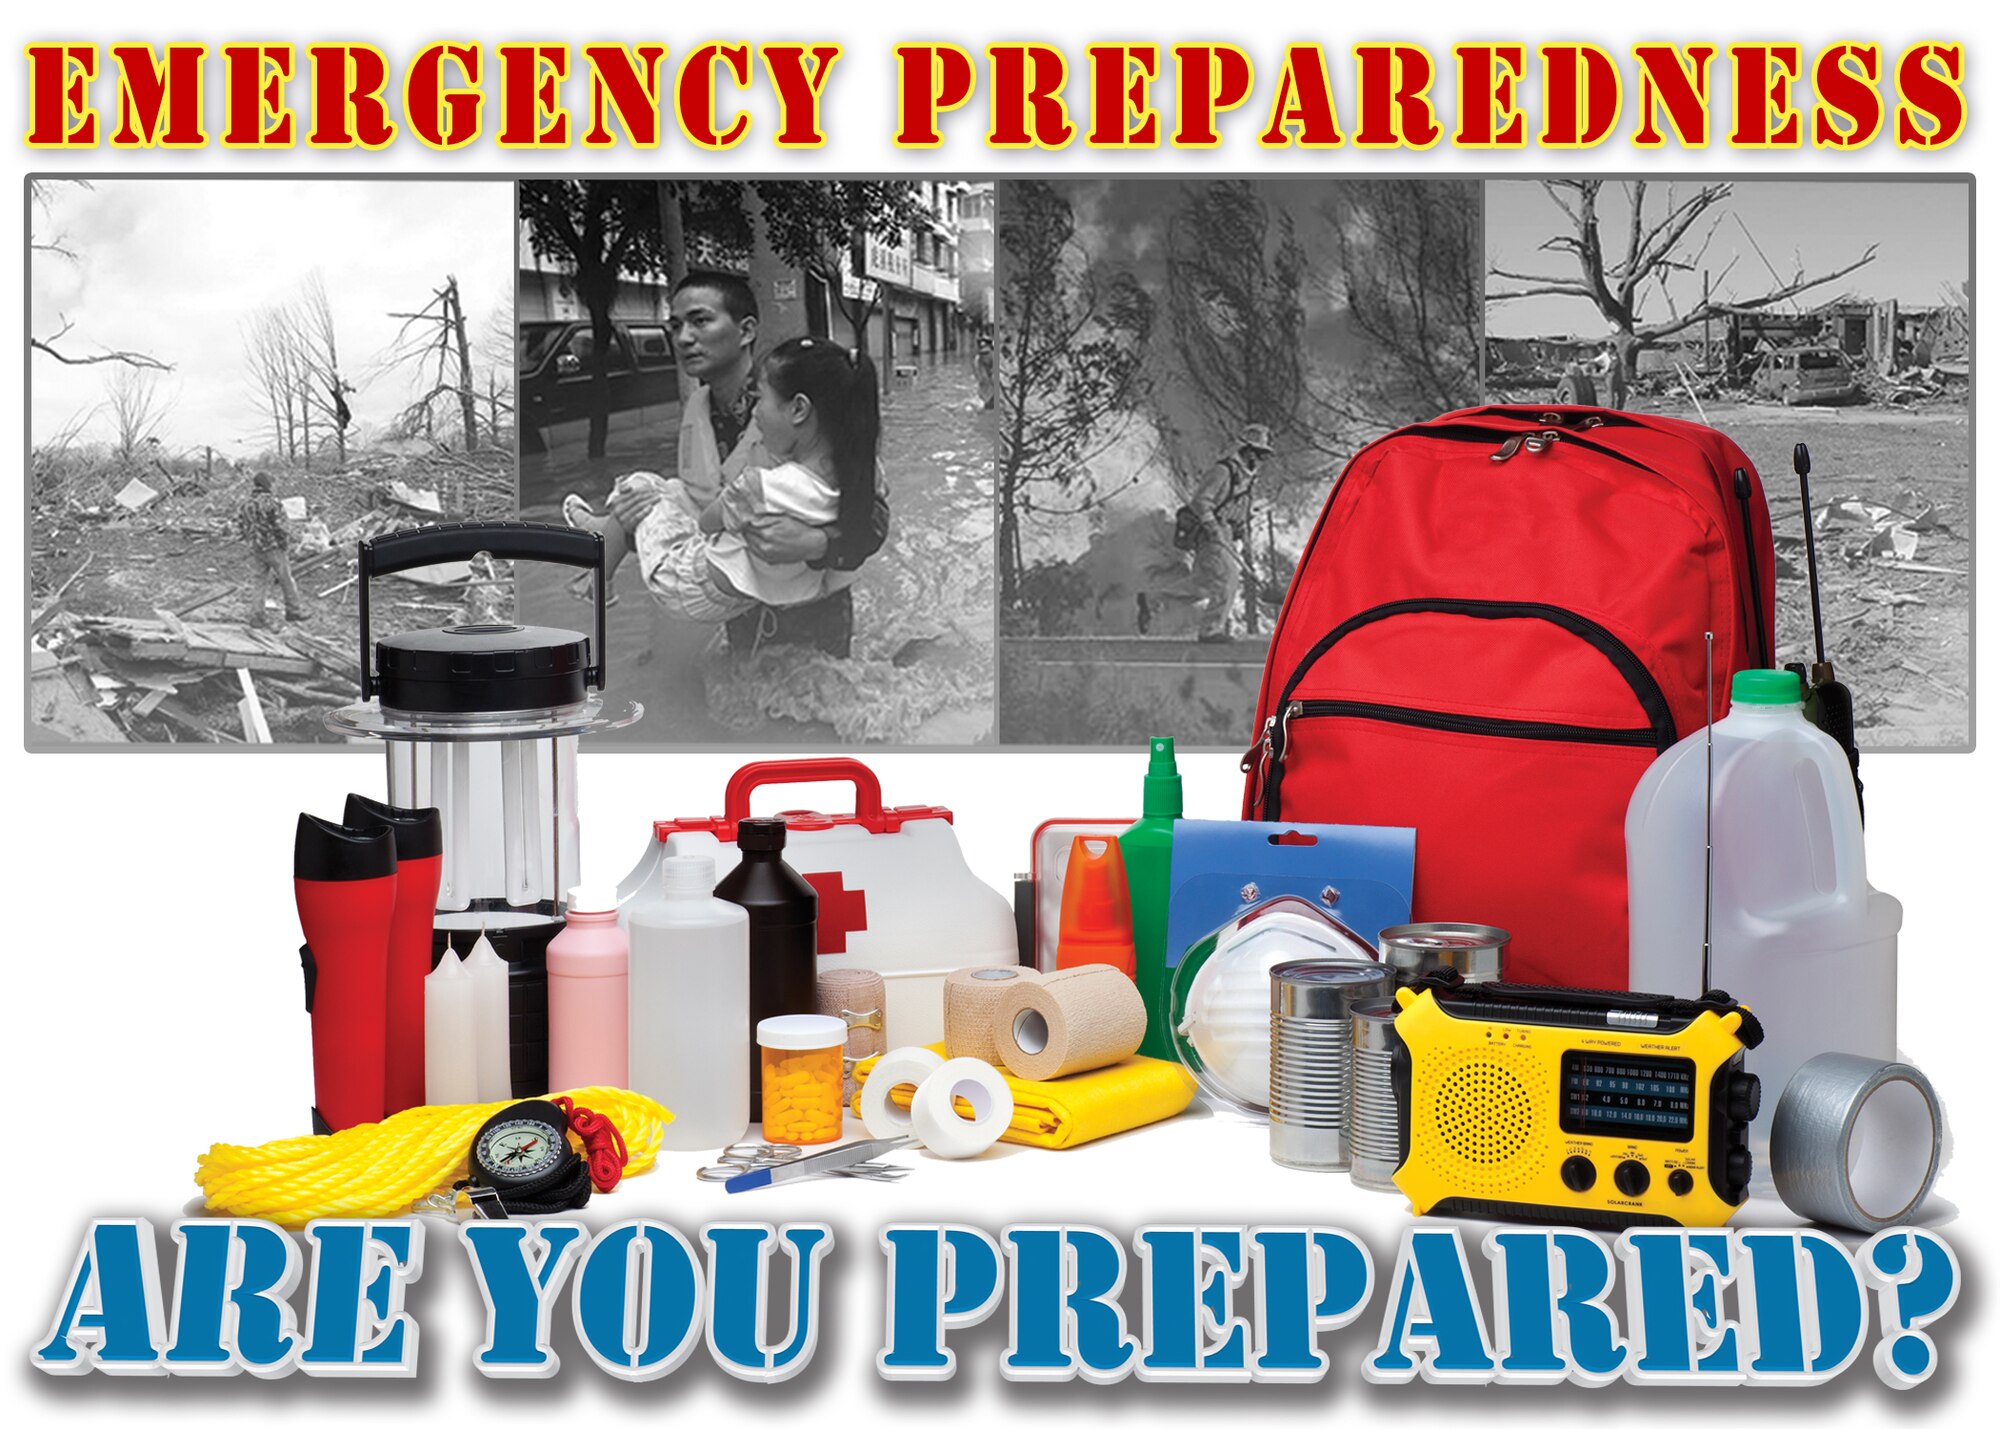 Since April 1, DeCA’s severe weather preparedness promotional package is offering various items at reduced prices until Oct. 31. This package includes the following items: beef jerky and other assorted meat snacks, soup and chili mixes, canned goods, powdered milk, cereals, batteries, airtight bags, weather-ready flashlights, tape (all-weather, heavy-duty shipping and duct), first-aid kits, lighters, matches, lanterns, candles, hand sanitizer and anti-bacterial wipes. Specific promotional items may vary from store to store.